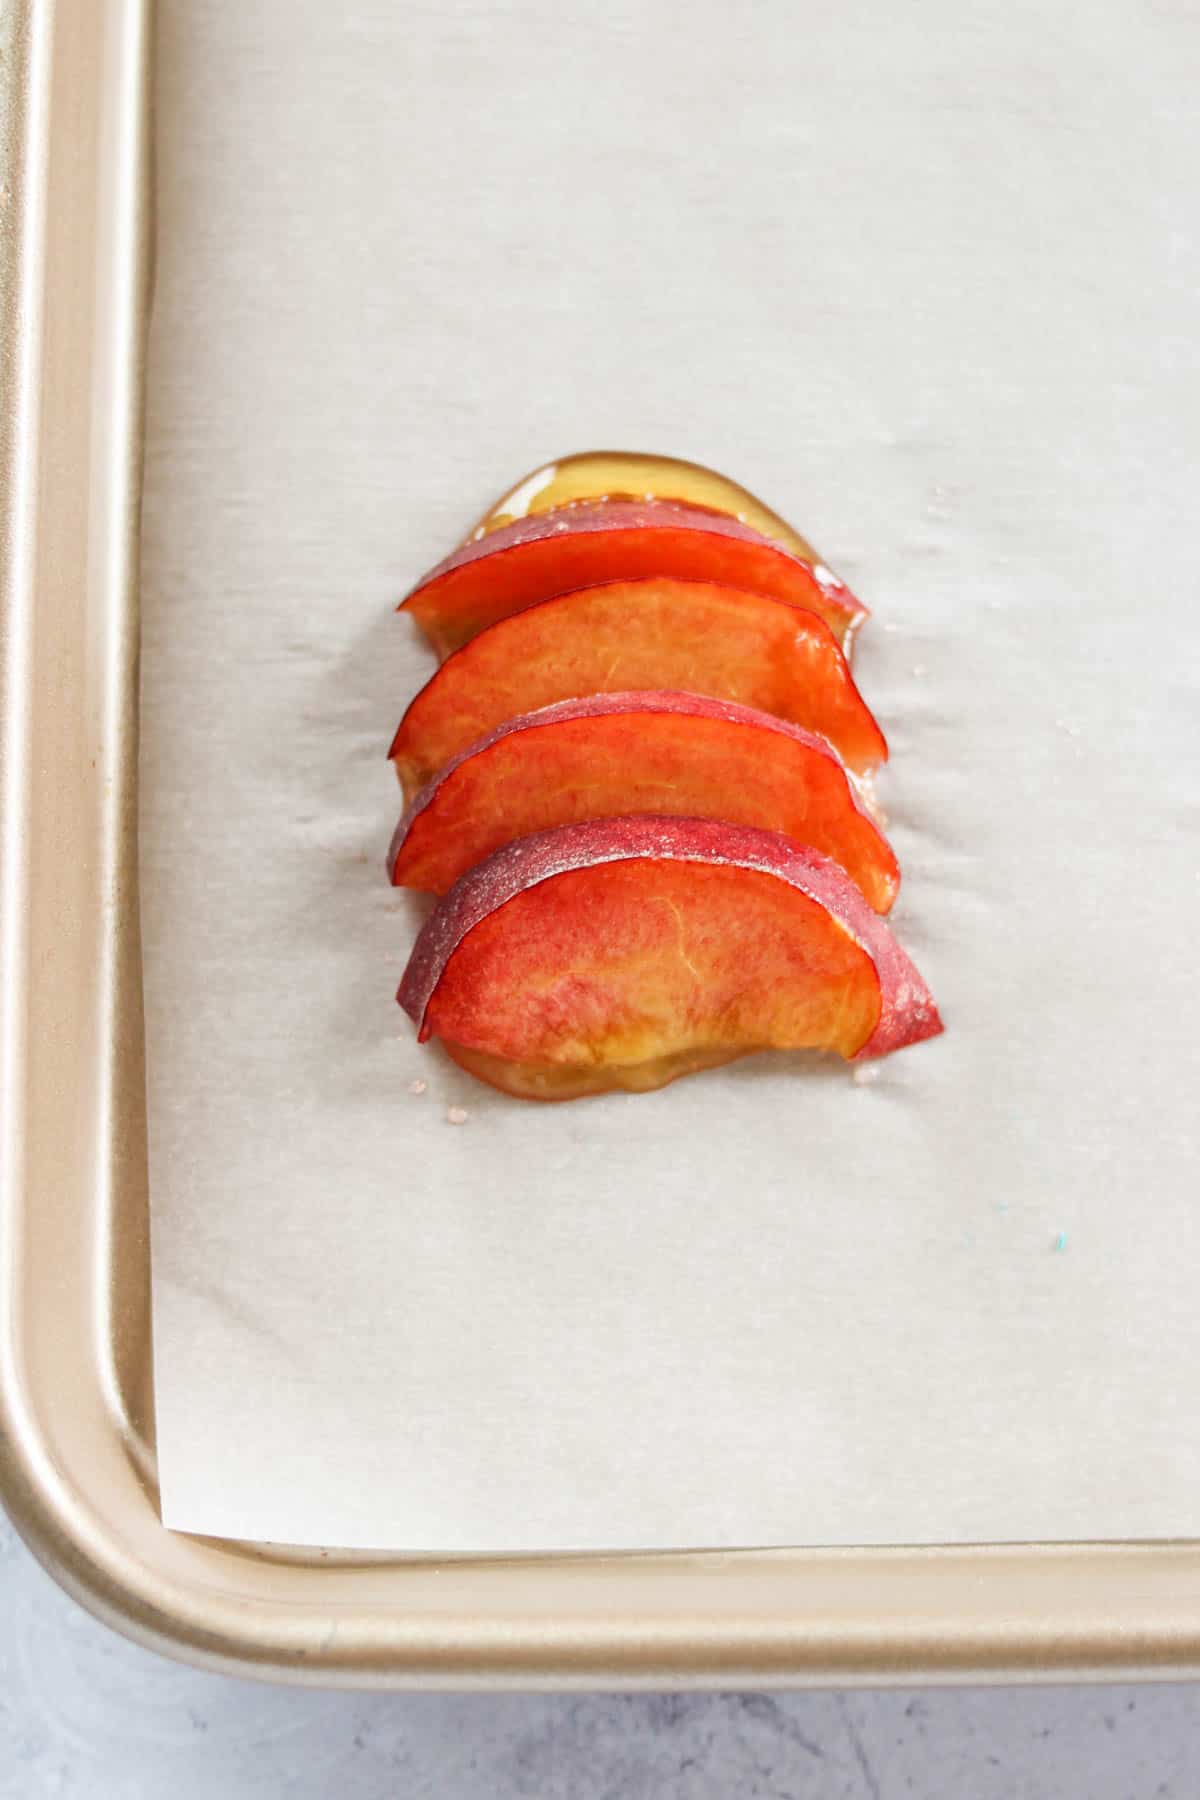 Upside Down Peach Puff Pastry - Blissfull Kitchen